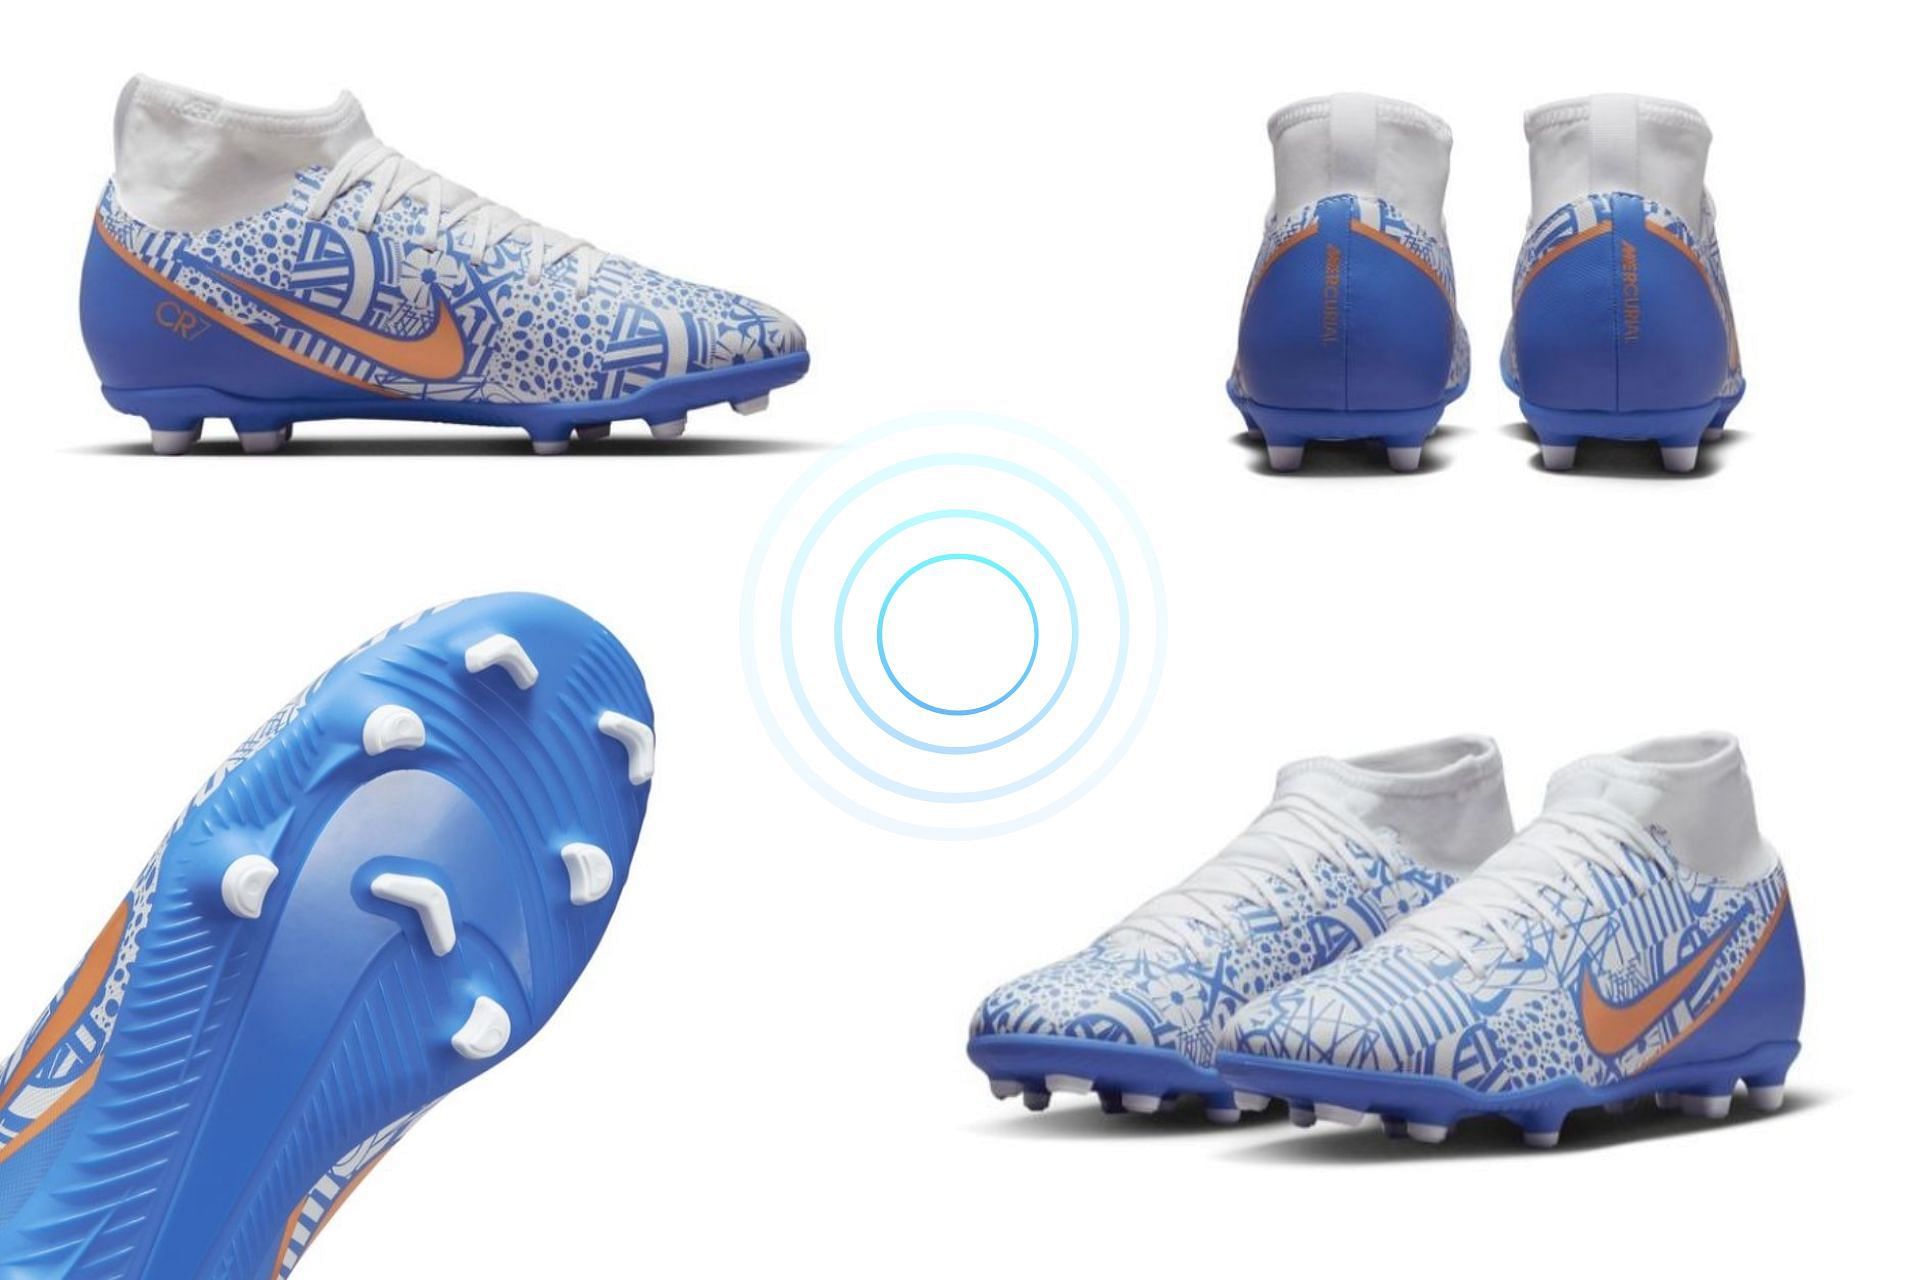 Take a closer look at the CR7 shoes (Image via Sportskeeda)